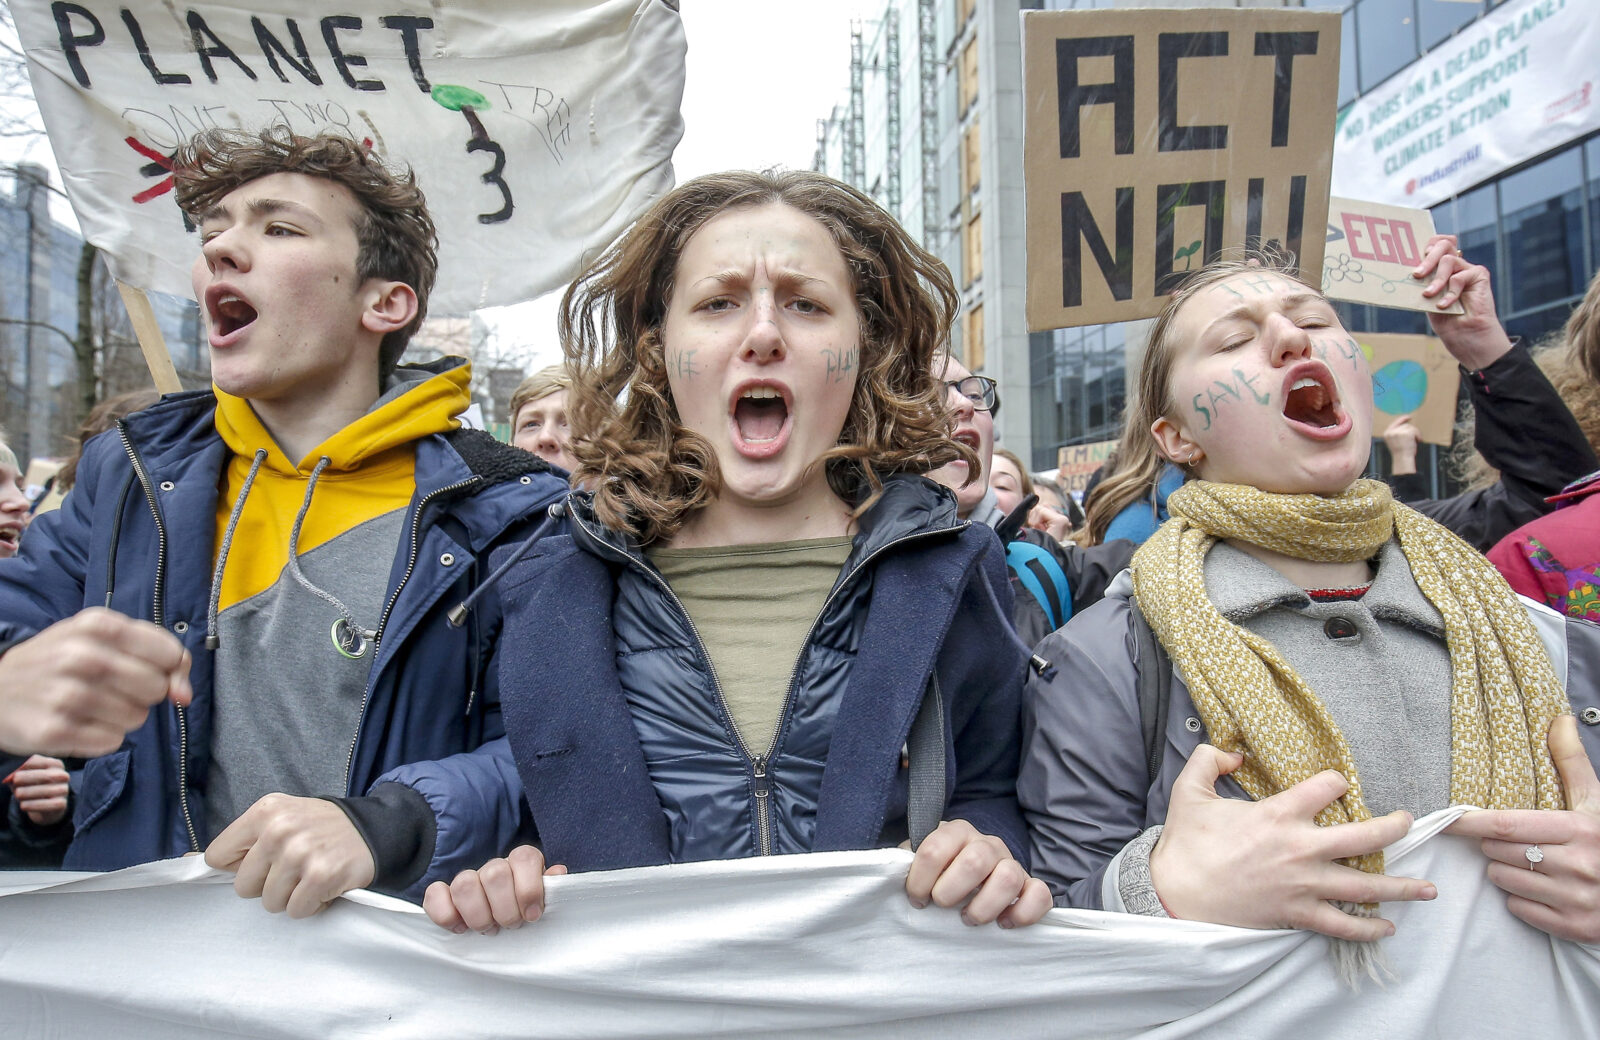 Students take part in a demonstration against climate change in Brussels, Belgium, 15 March 2019. Students across the world are taking part in a massive global student strike movement called #FridayForFuture which was sparked by Greta Thunberg of Sweden, a sixteen-year-old climate activist who has been protesting outside the Swedish parliament every Friday since August 2018.